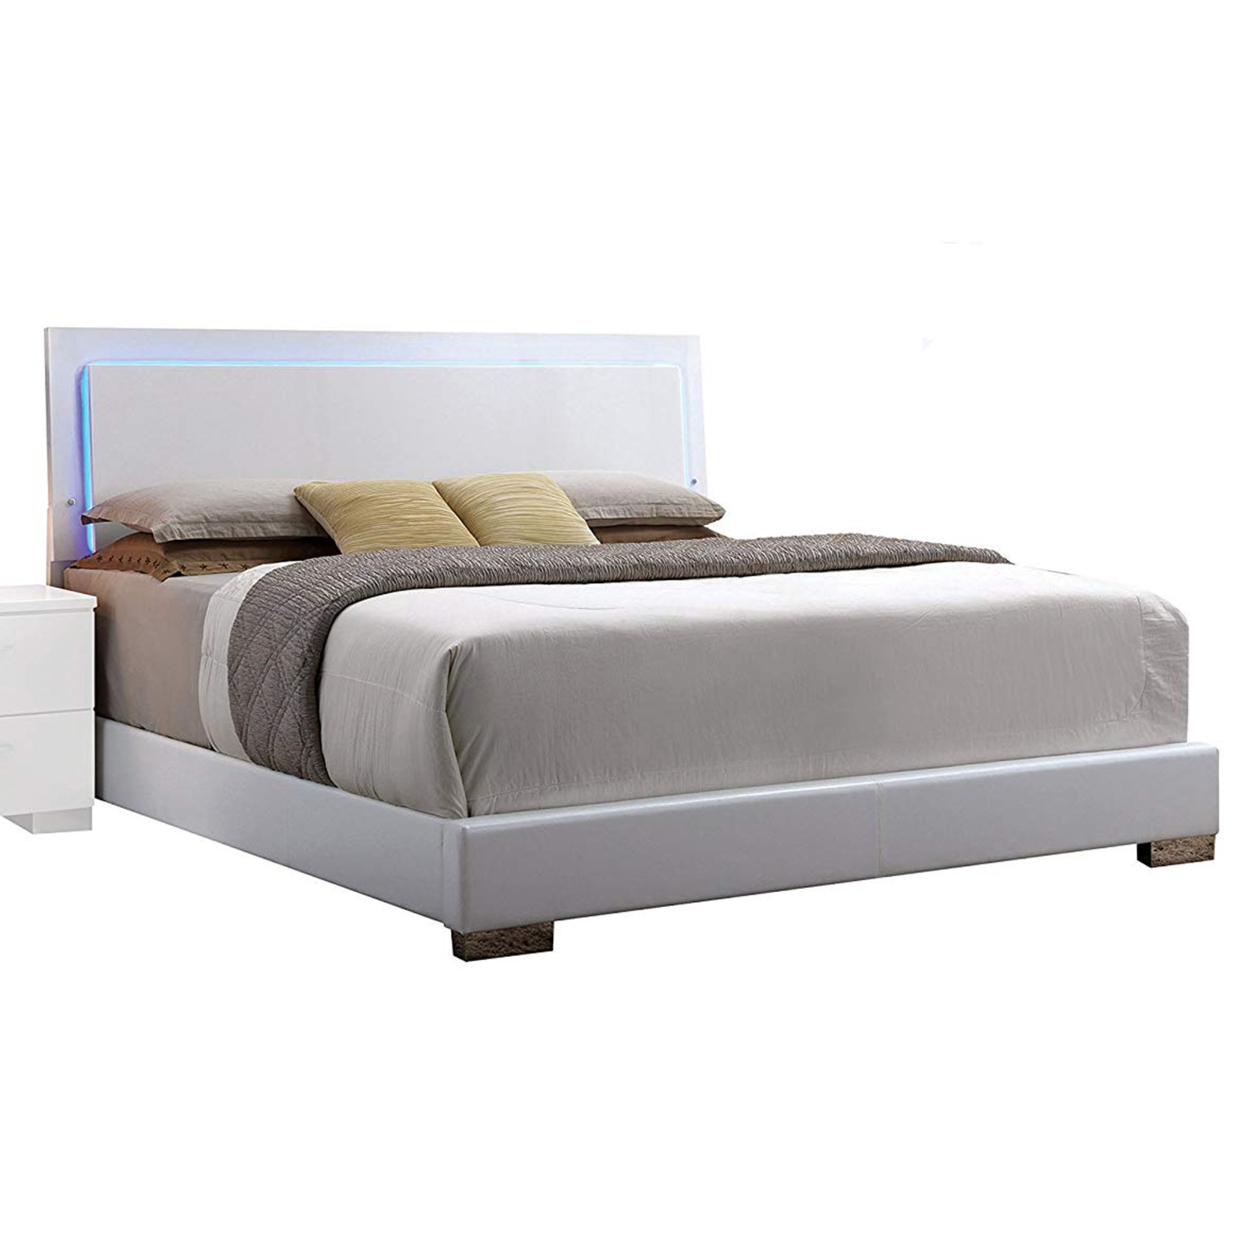 Contemporary Style Queen Size Wooden Panel Bed With Headboard, White- Saltoro Sherpi